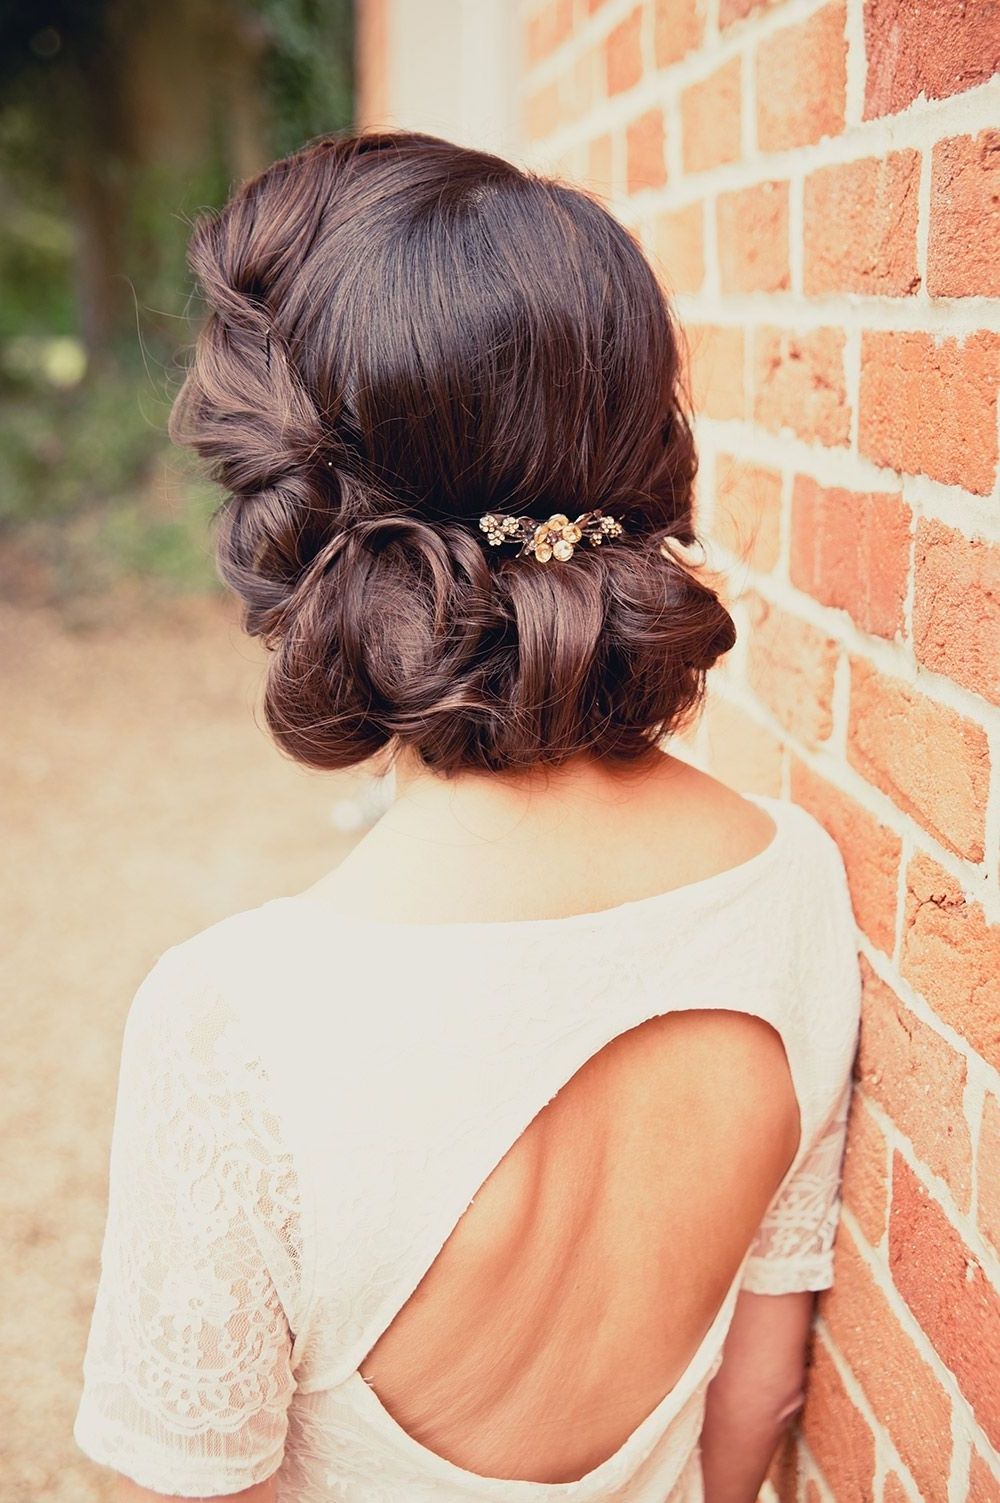 Beautiful Wedding Updos: 17 Inspirational Styles For Your Big Day Pertaining To Most Recent Retro Wedding Hairstyles (View 3 of 15)